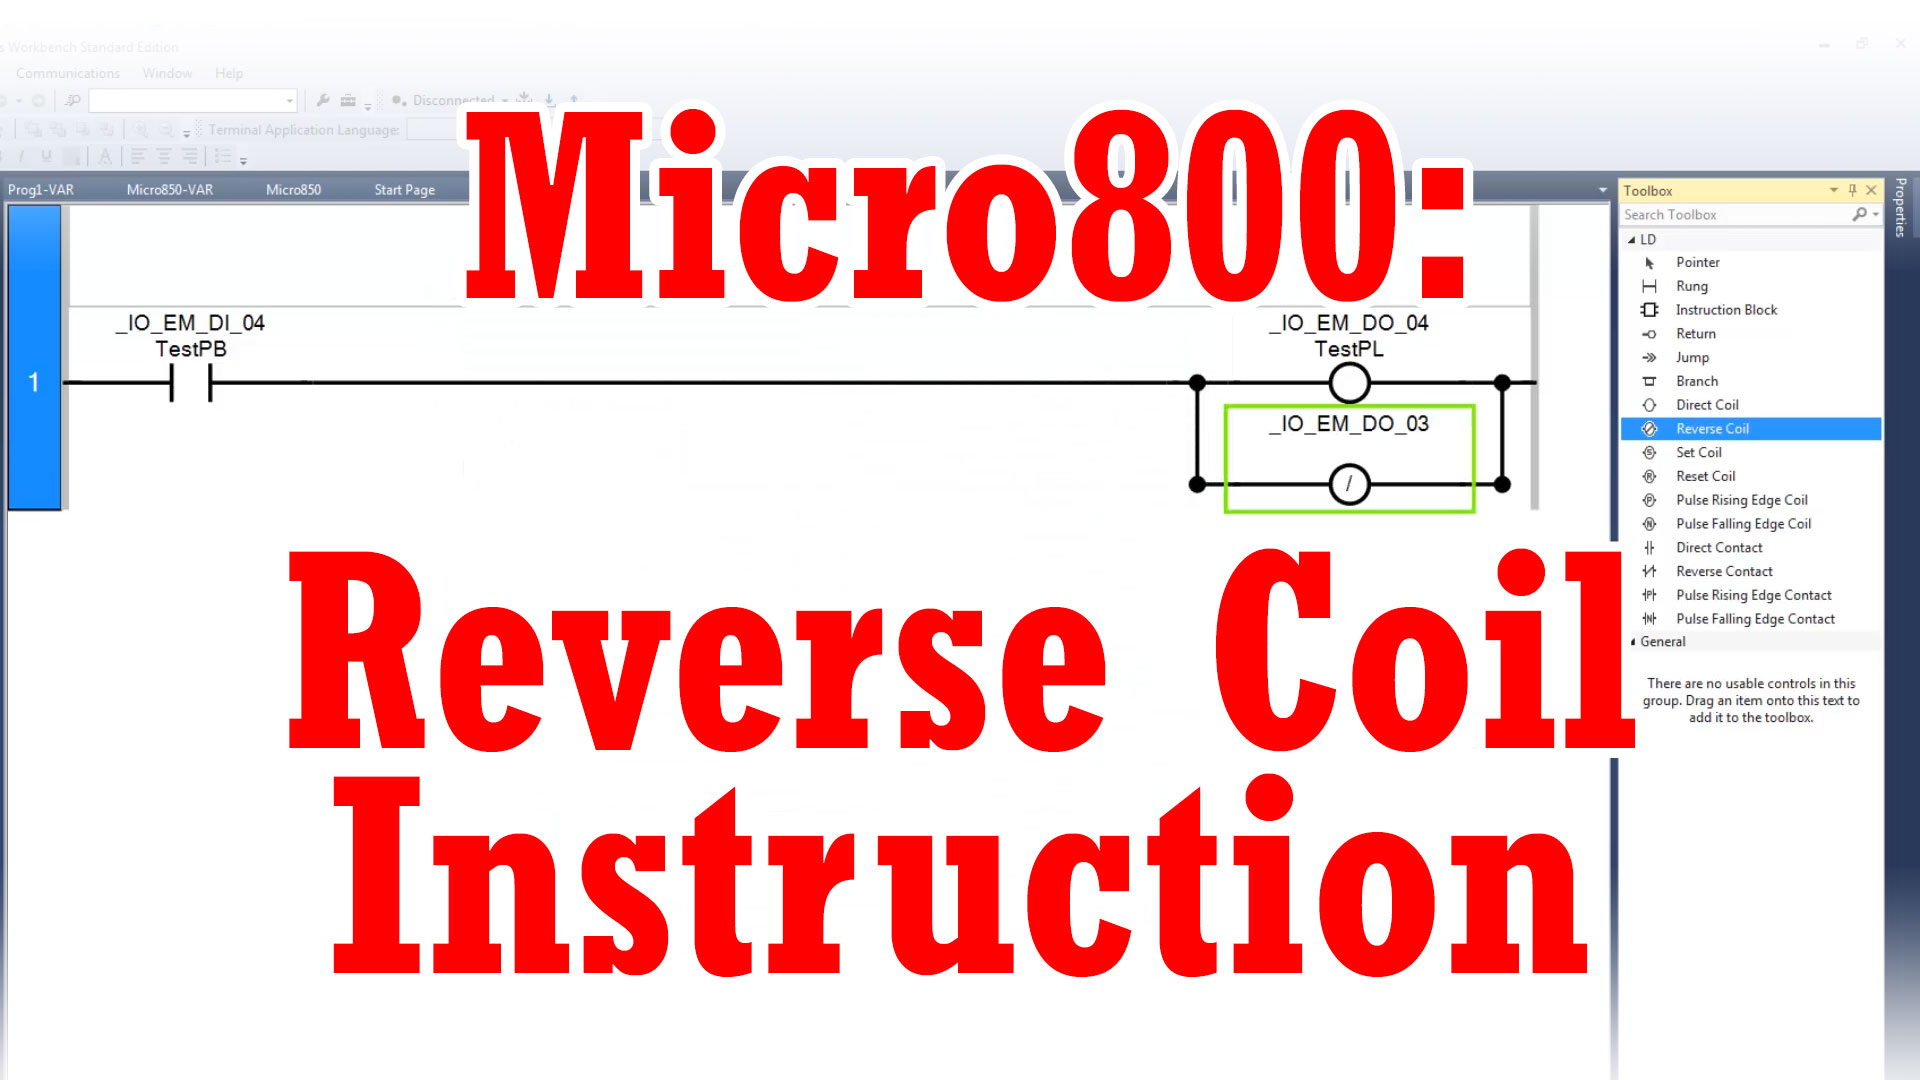 Micro800, CCW - Using the Reverse Coil Instruction